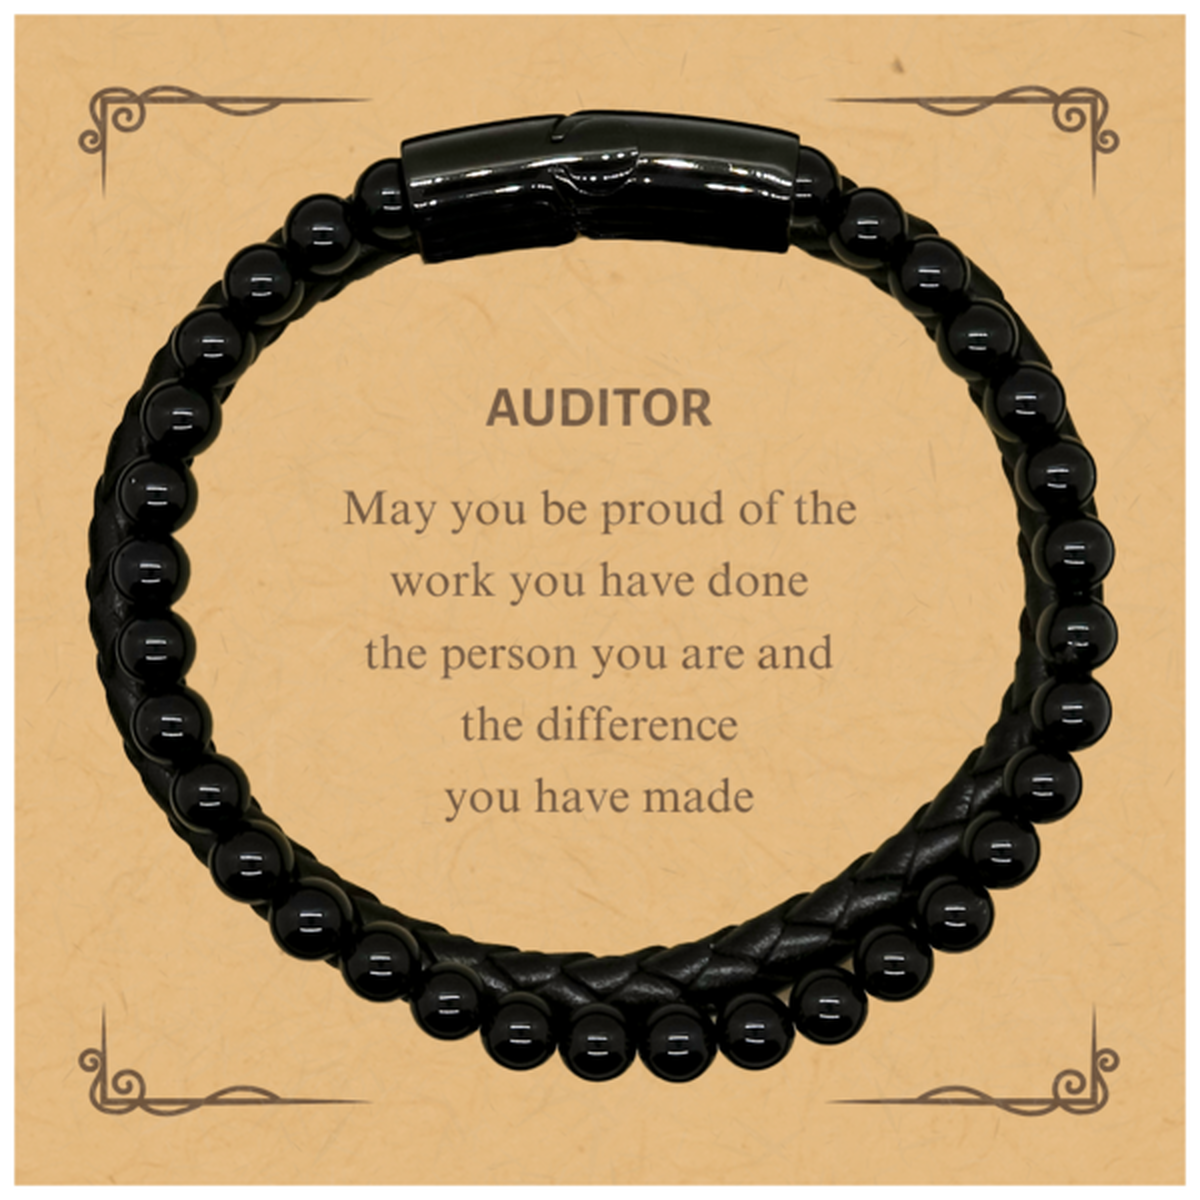 Auditor May you be proud of the work you have done, Retirement Auditor Stone Leather Bracelets for Colleague Appreciation Gifts Amazing for Auditor